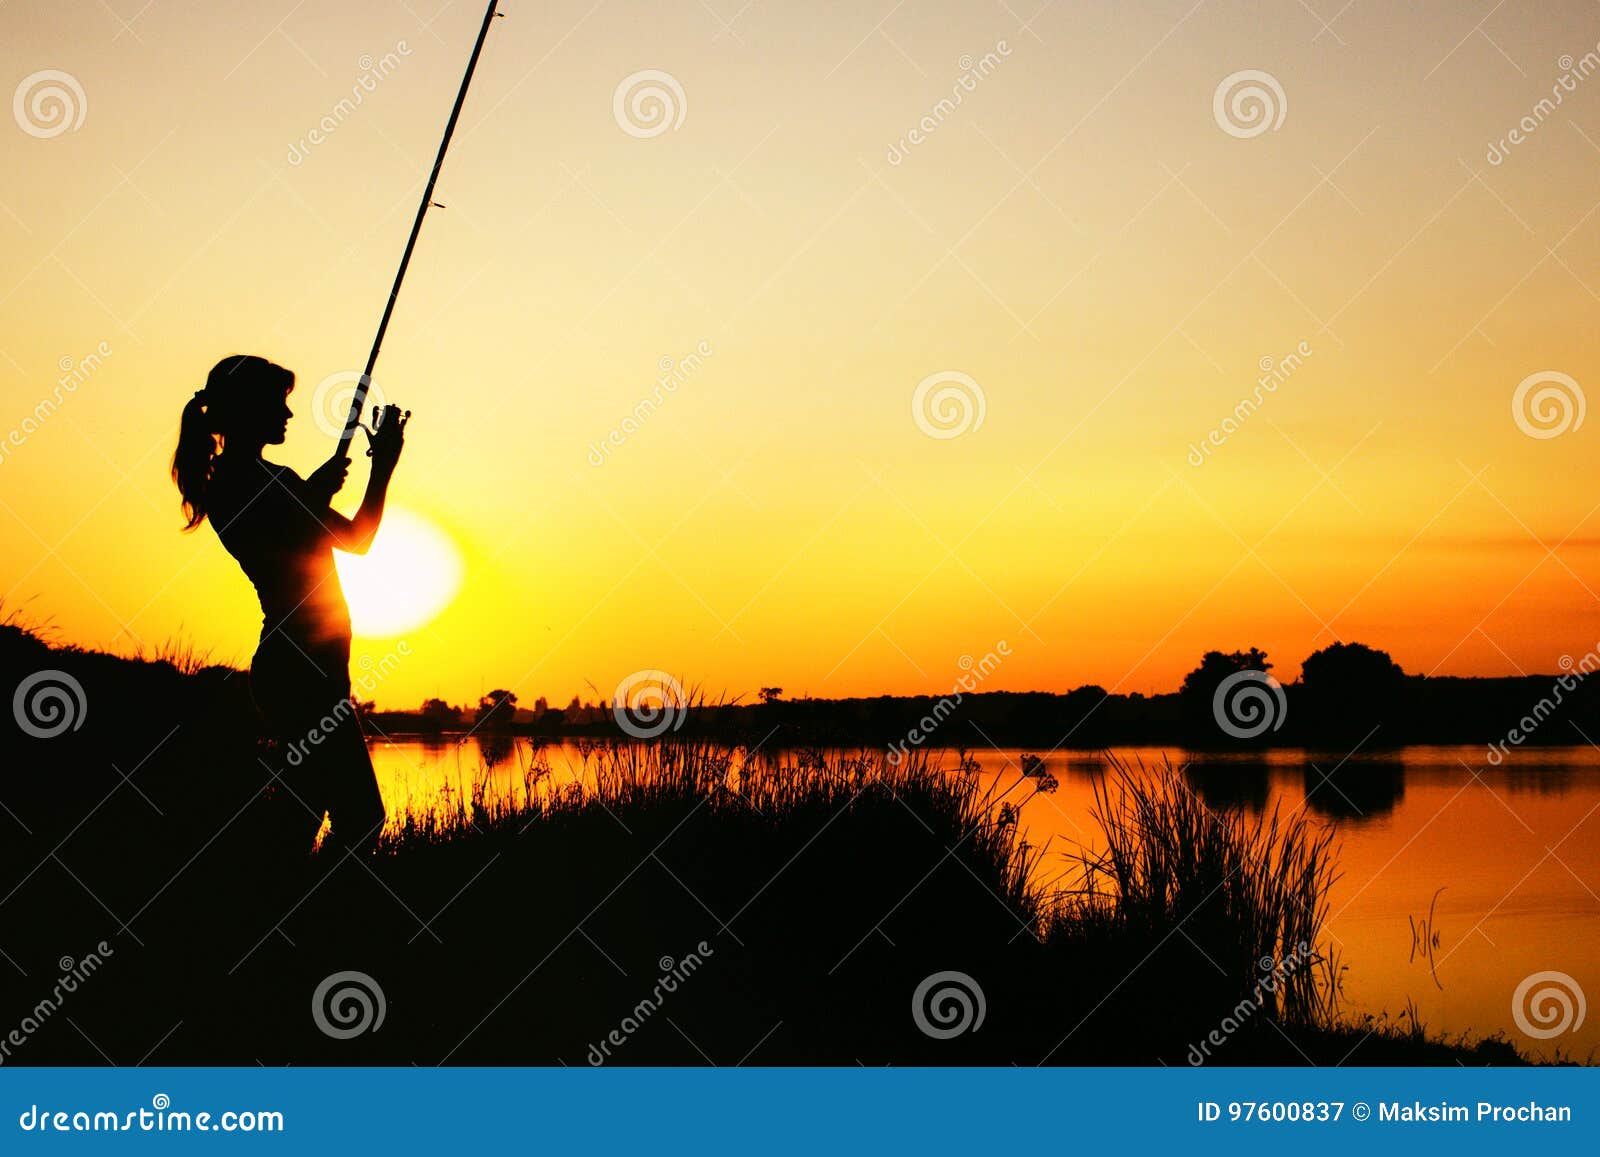 Silhouette of a Fishing Woman at Dawn Stock Image - Image of